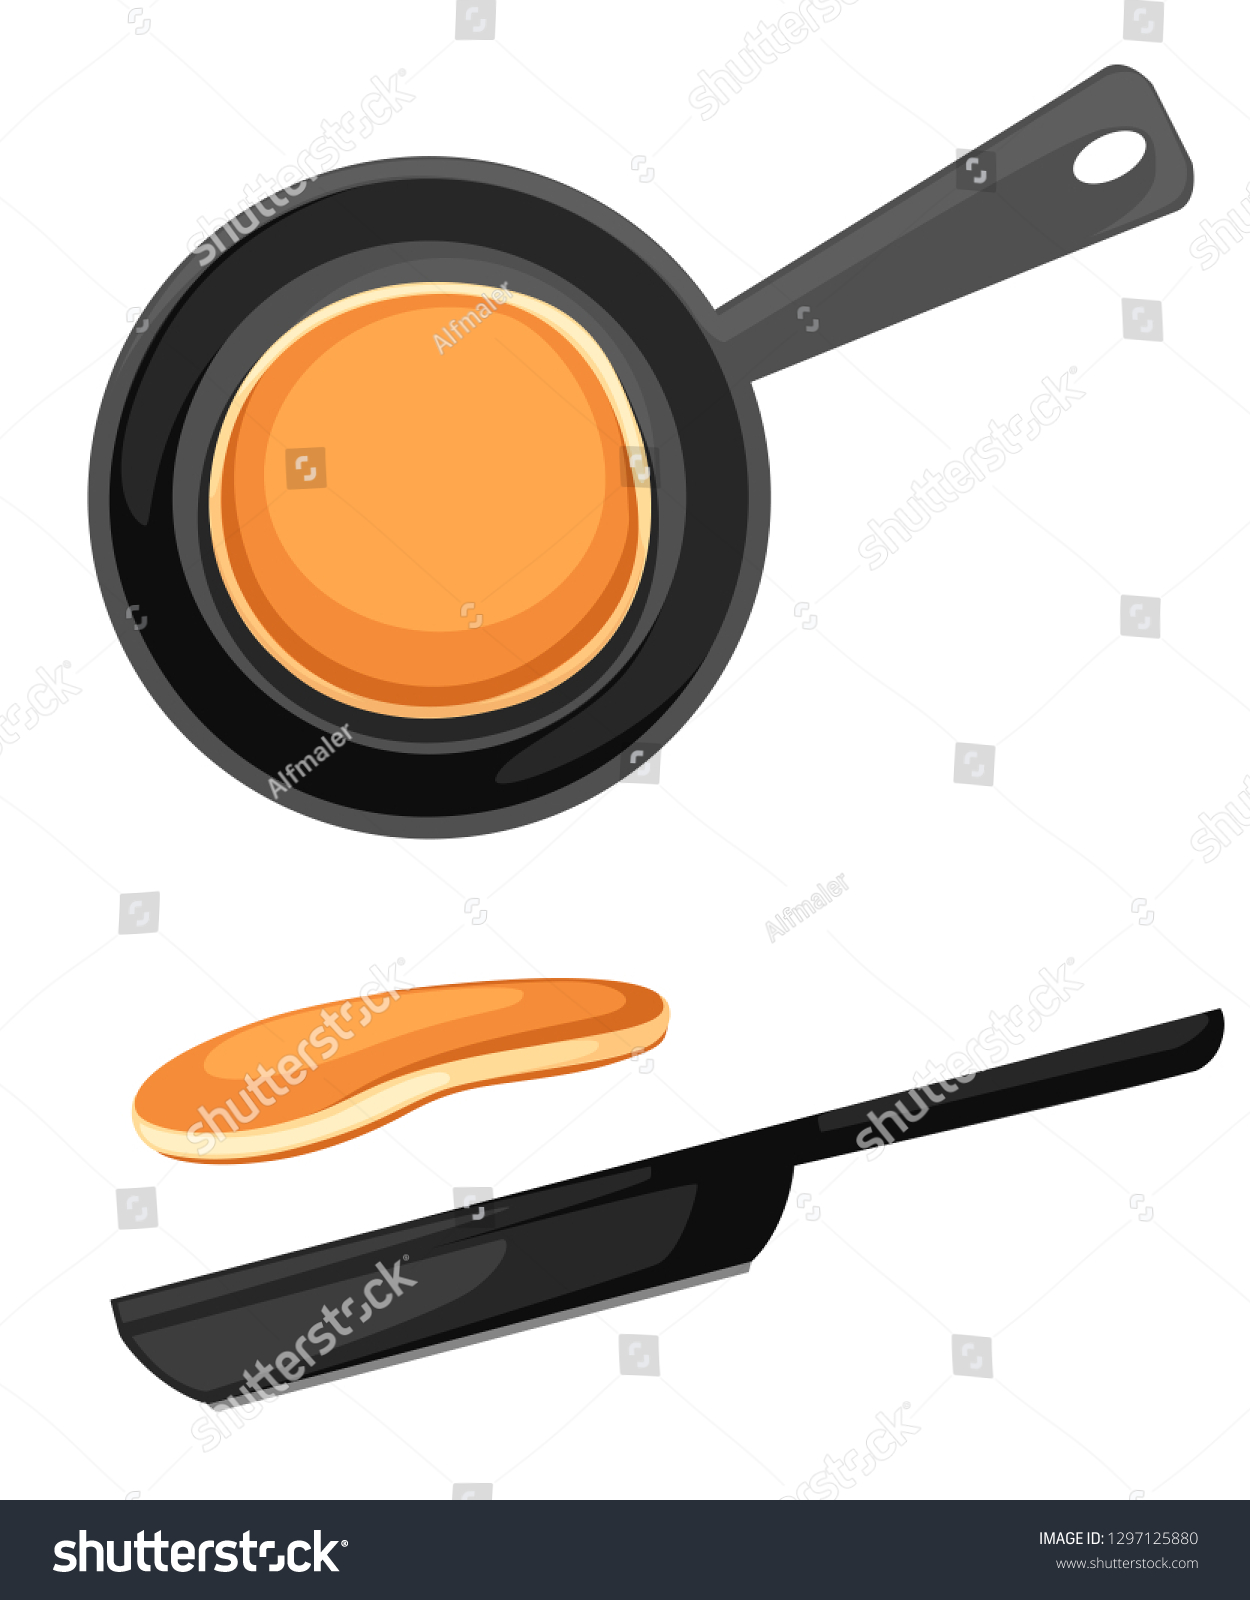 SVG of Flying pancakes and frying pan. Flat vector illustration isolated on white background. Breakfast icon. svg